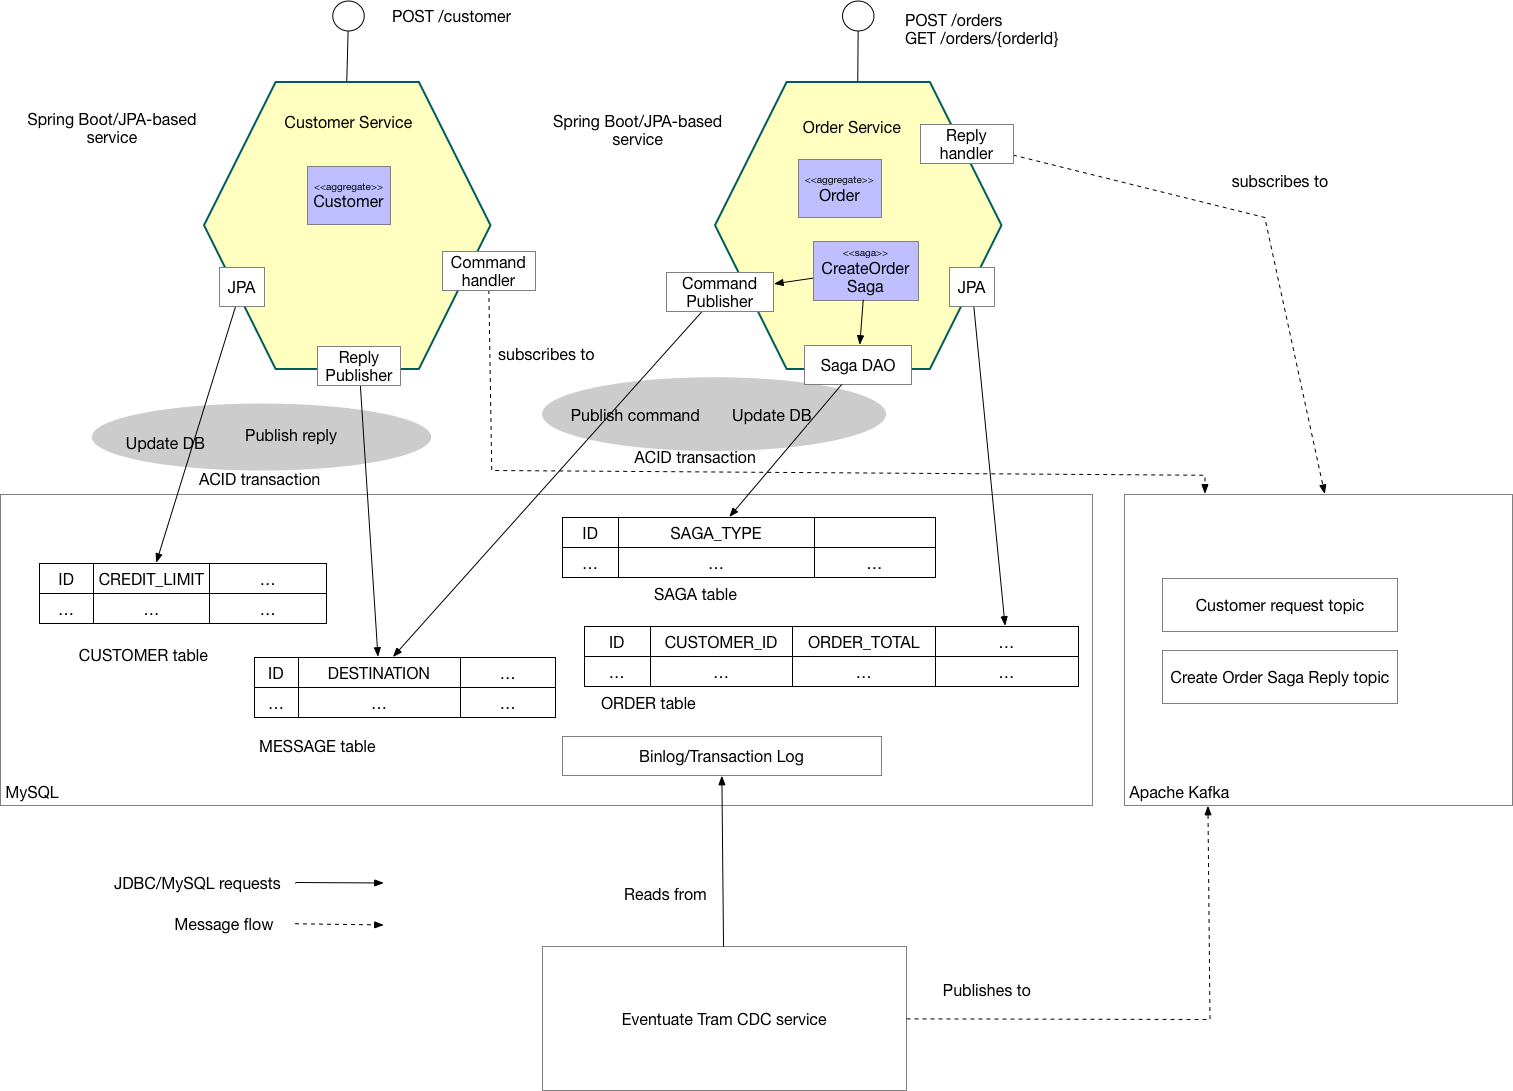 Eventuate Tram Customer and Order Orchestration Architecture